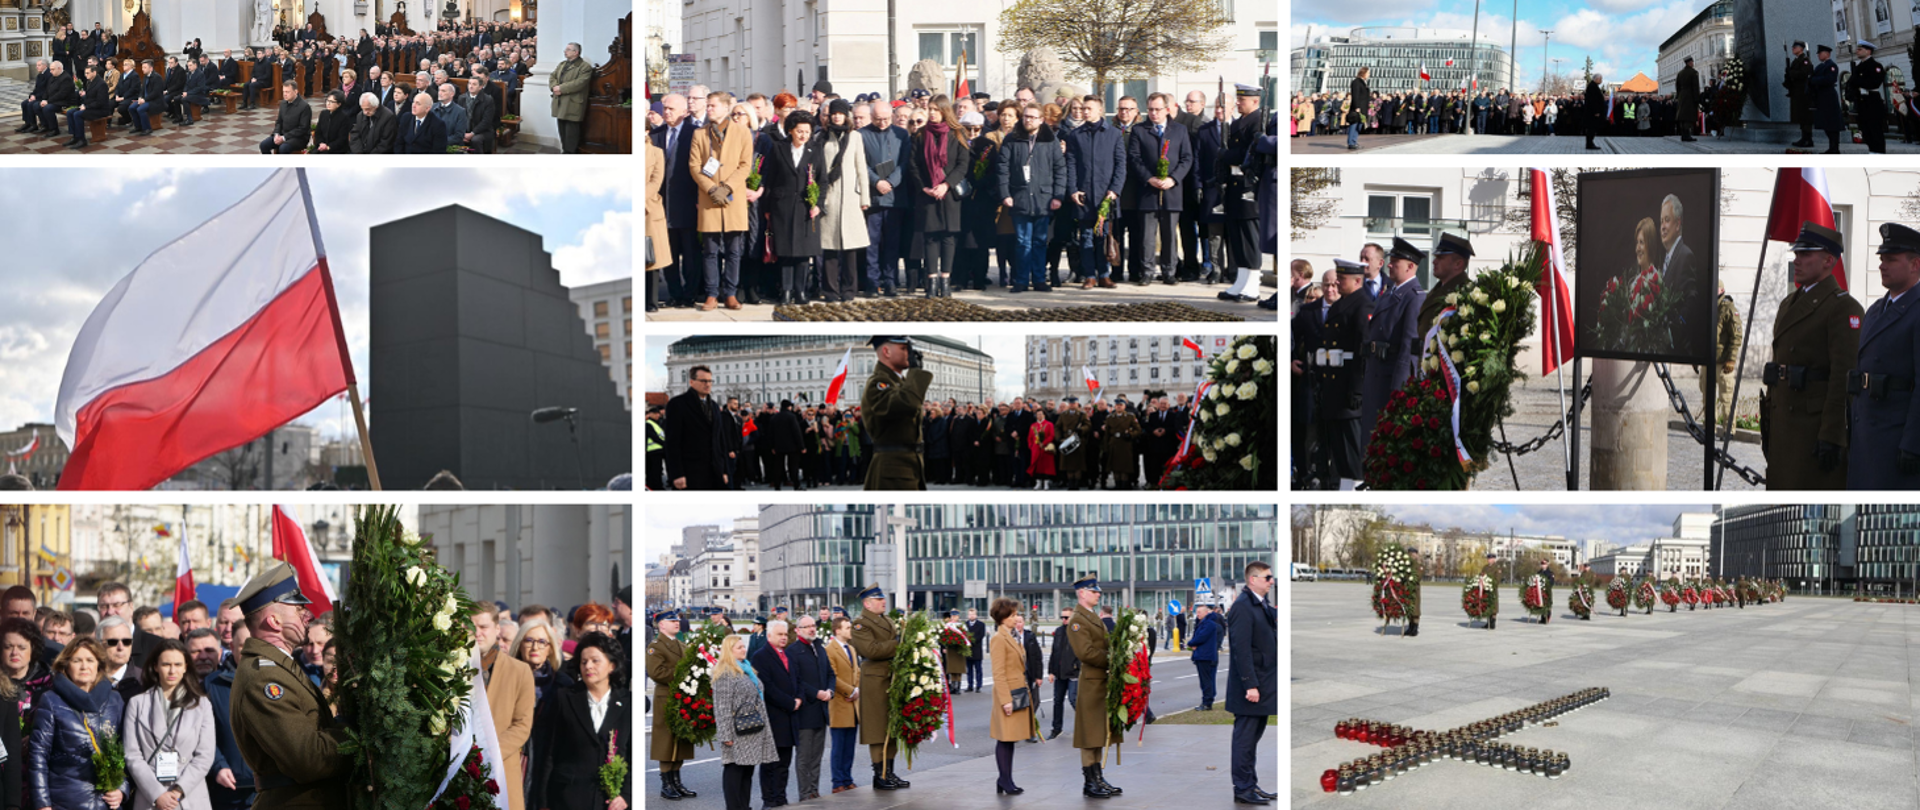 Celebrations of the 12th anniversary of the Smolensk air disaster